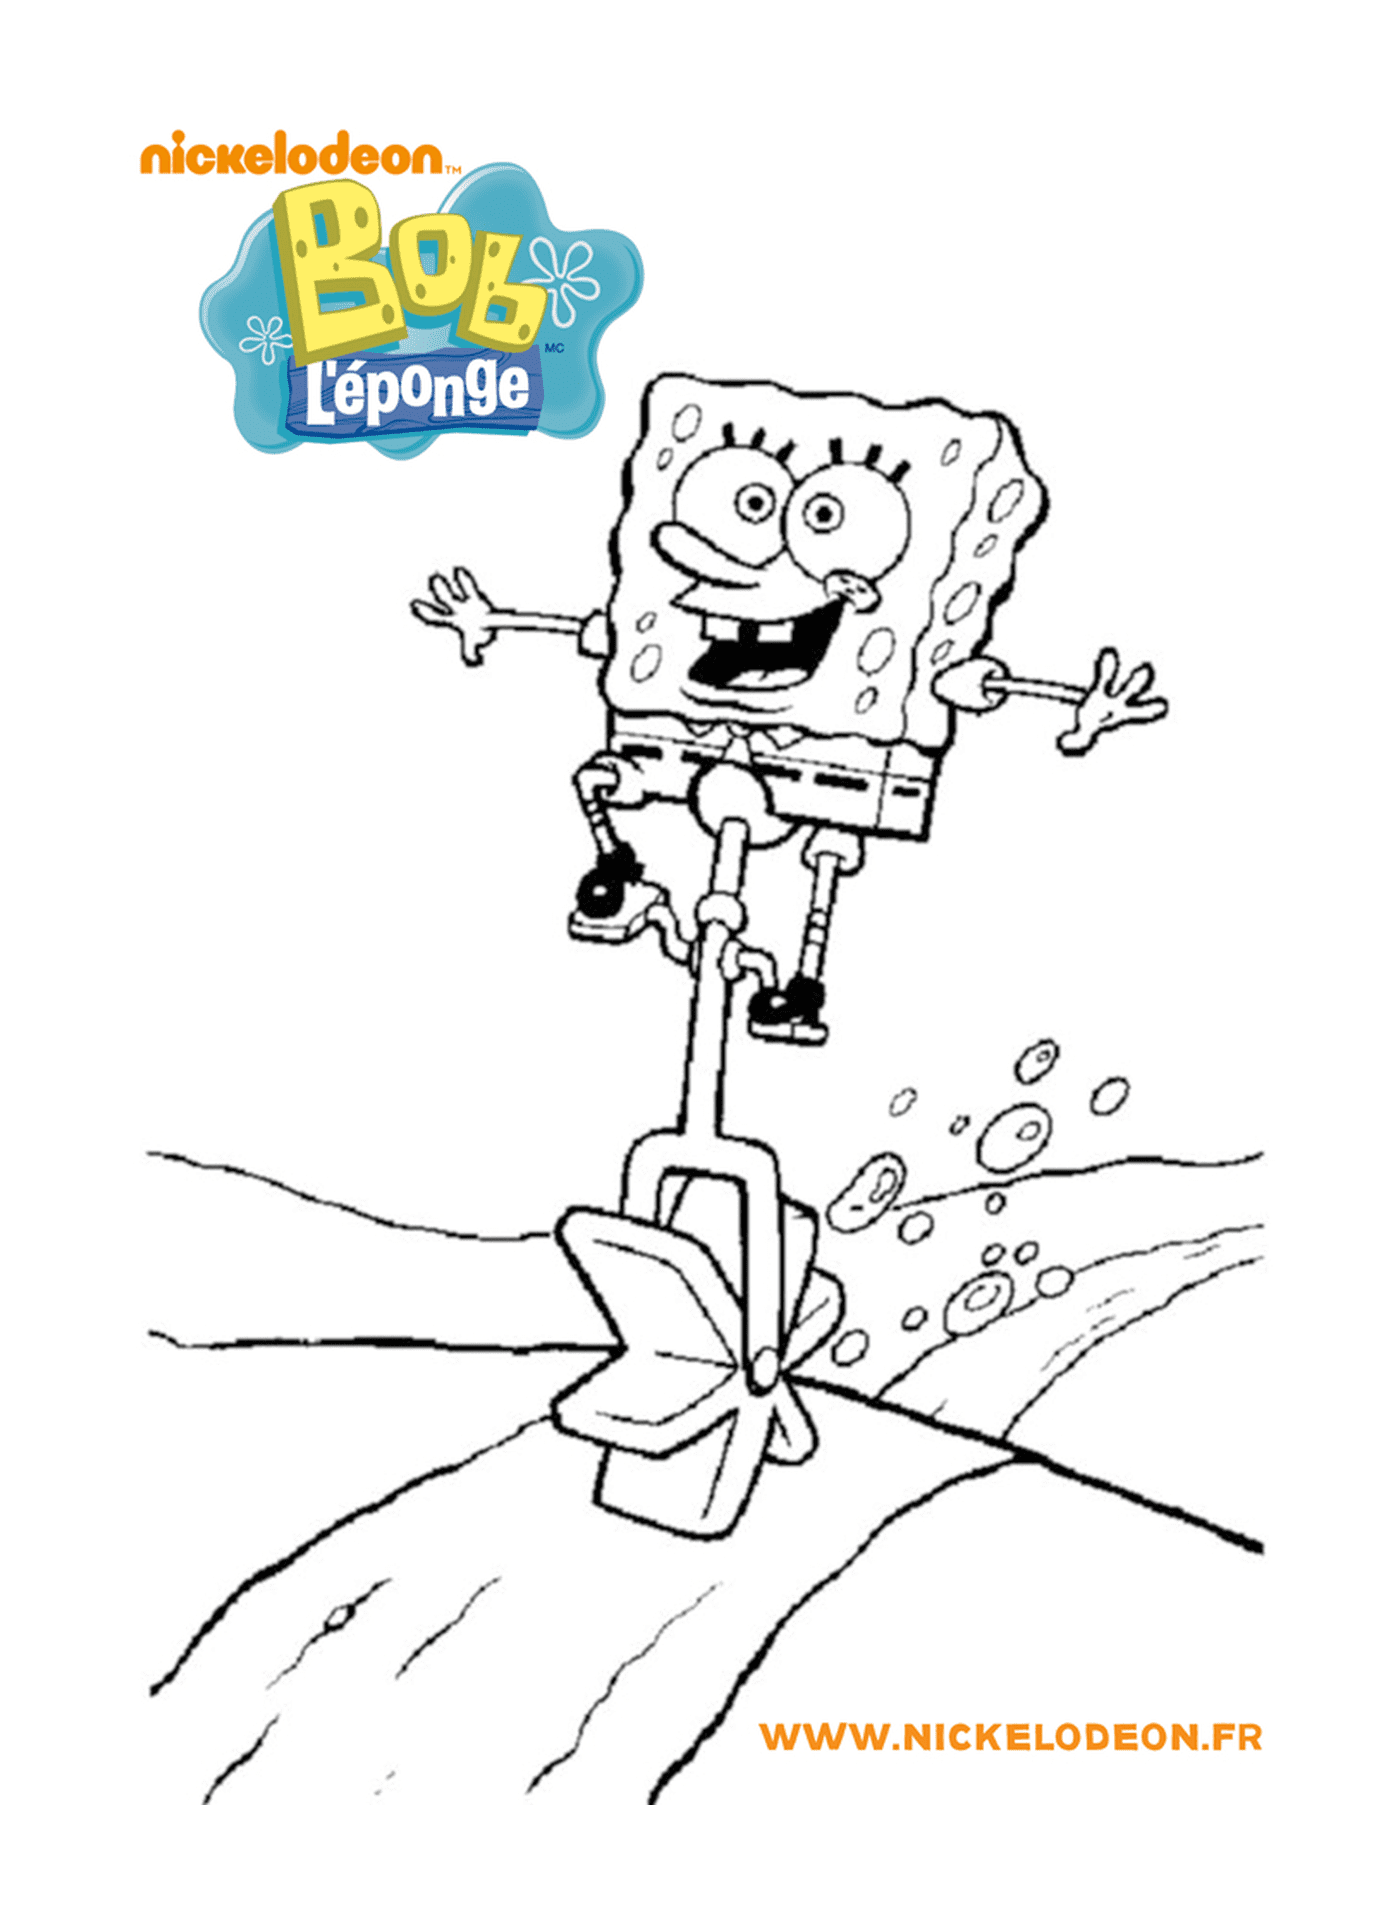  Bob the sponge jumping over a trash can 